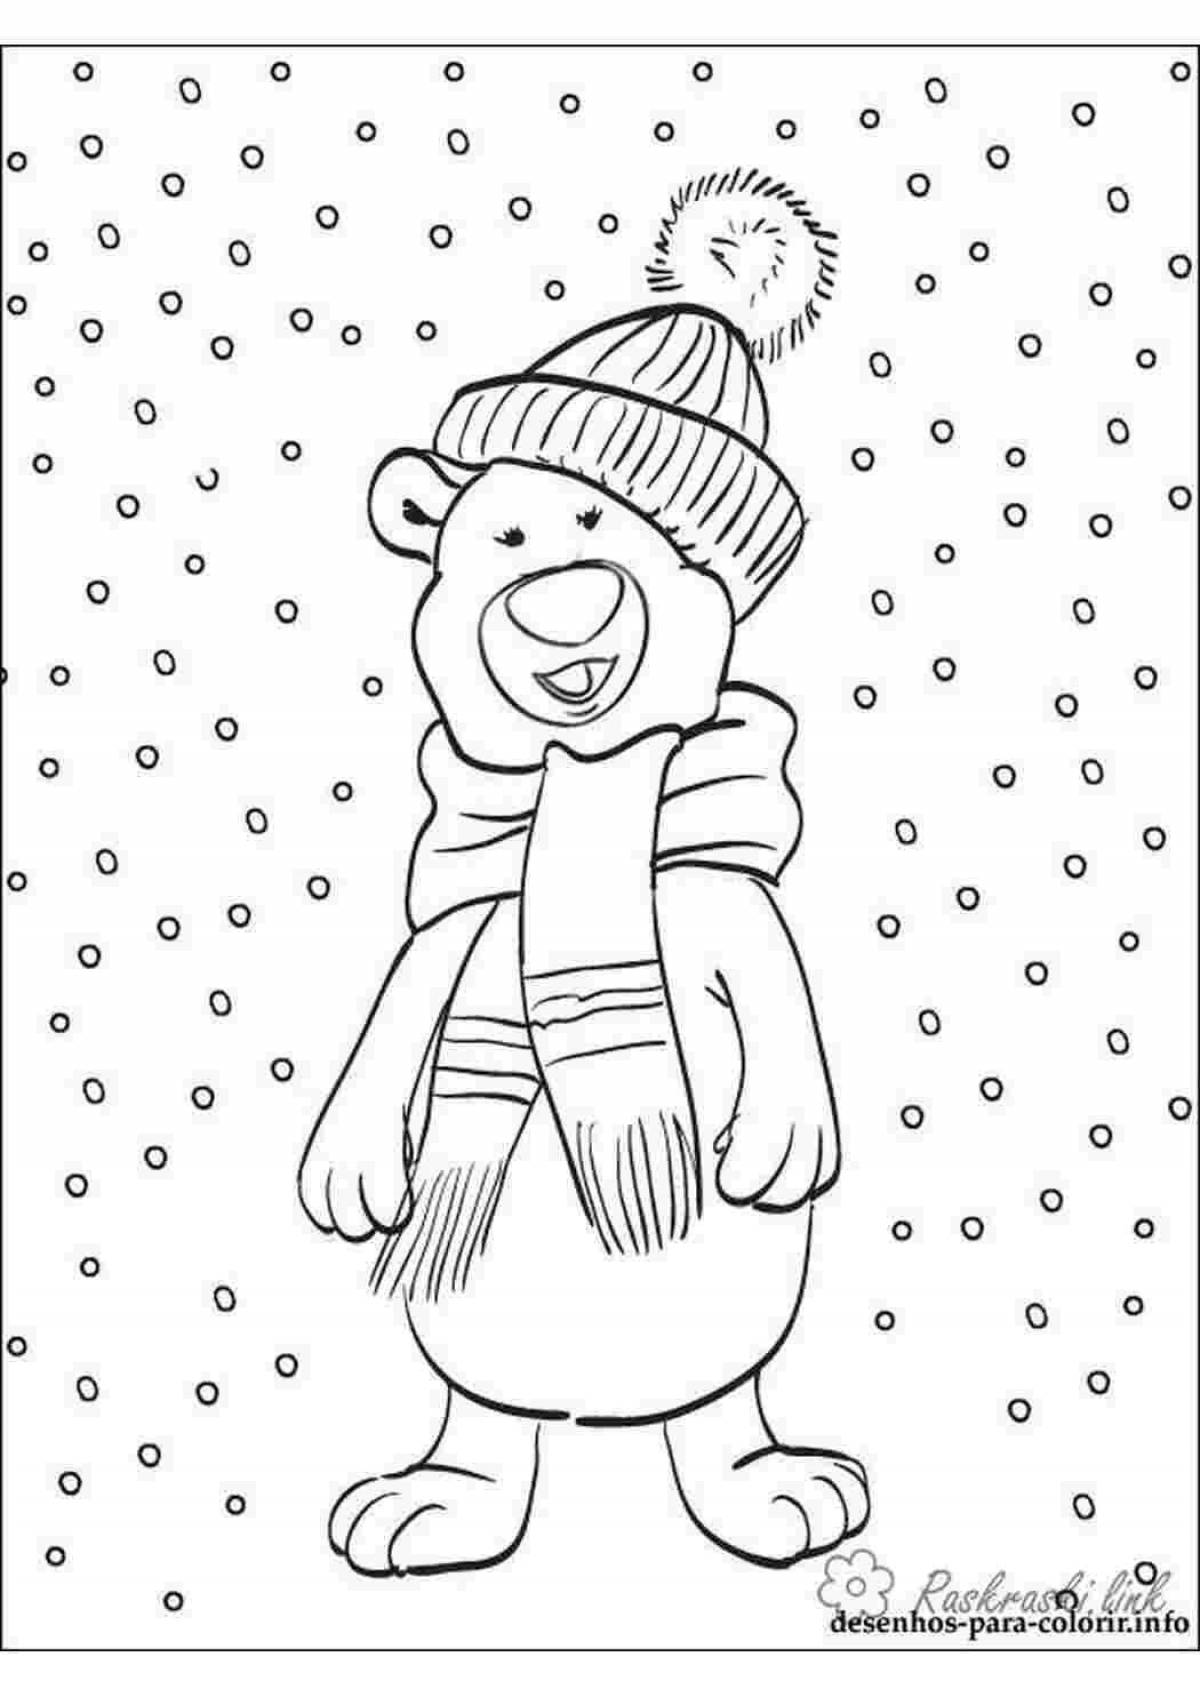 Gorgeous snowfall coloring book for preschoolers